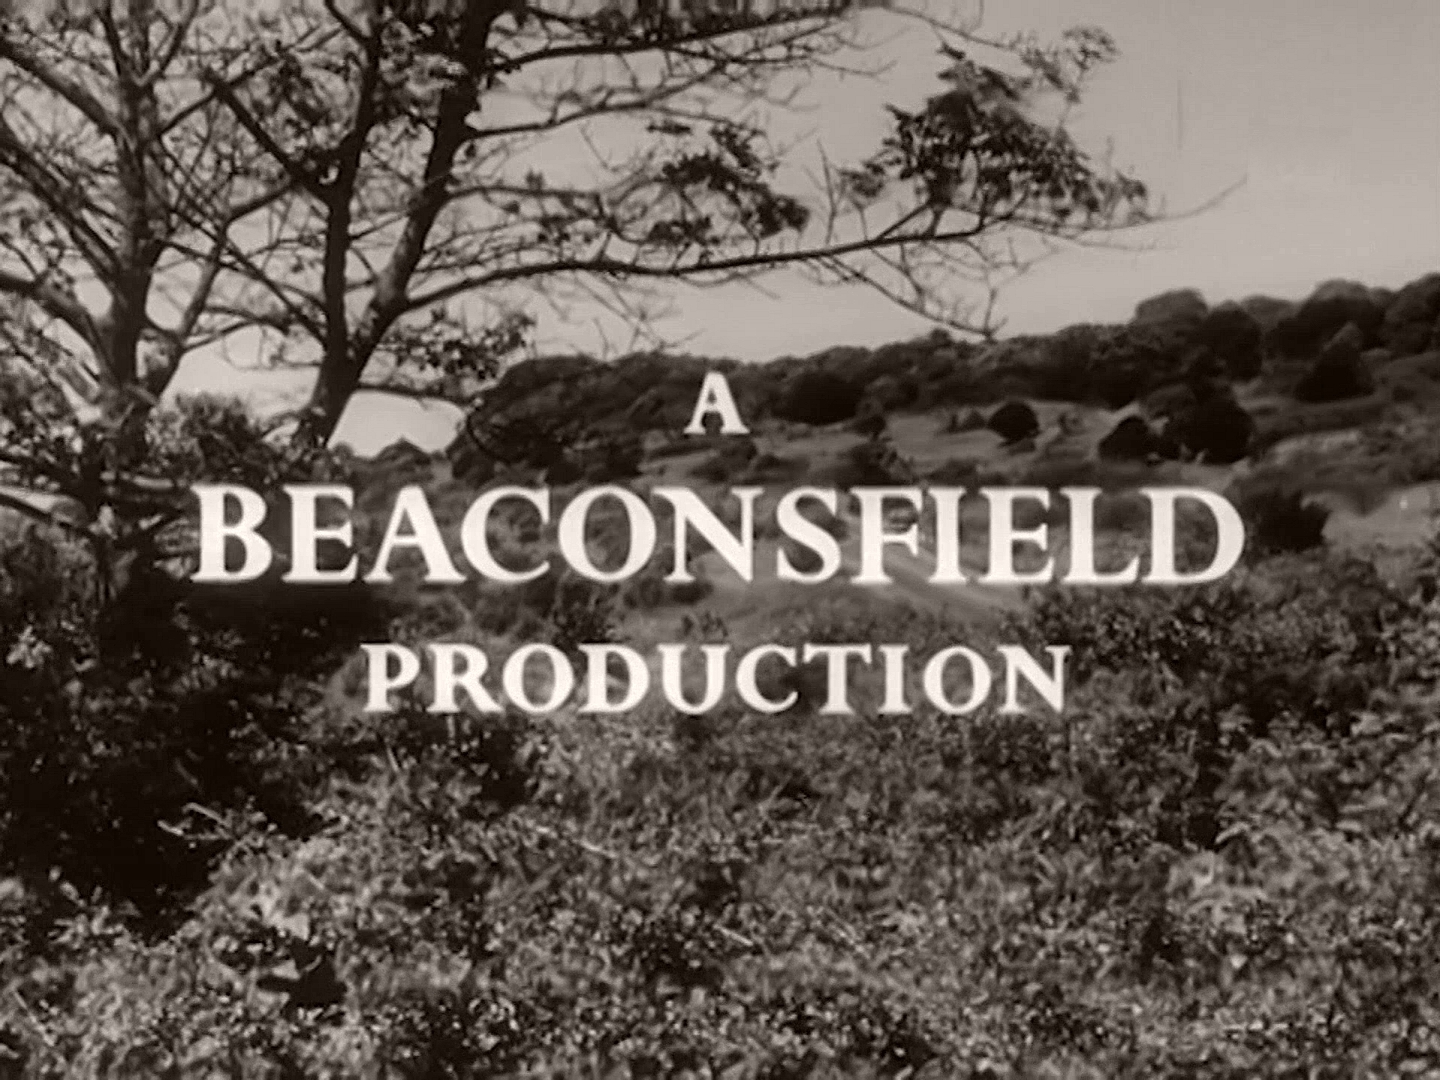 Main title from The Passionate Stranger (1957) (2). A Beaconsfield production